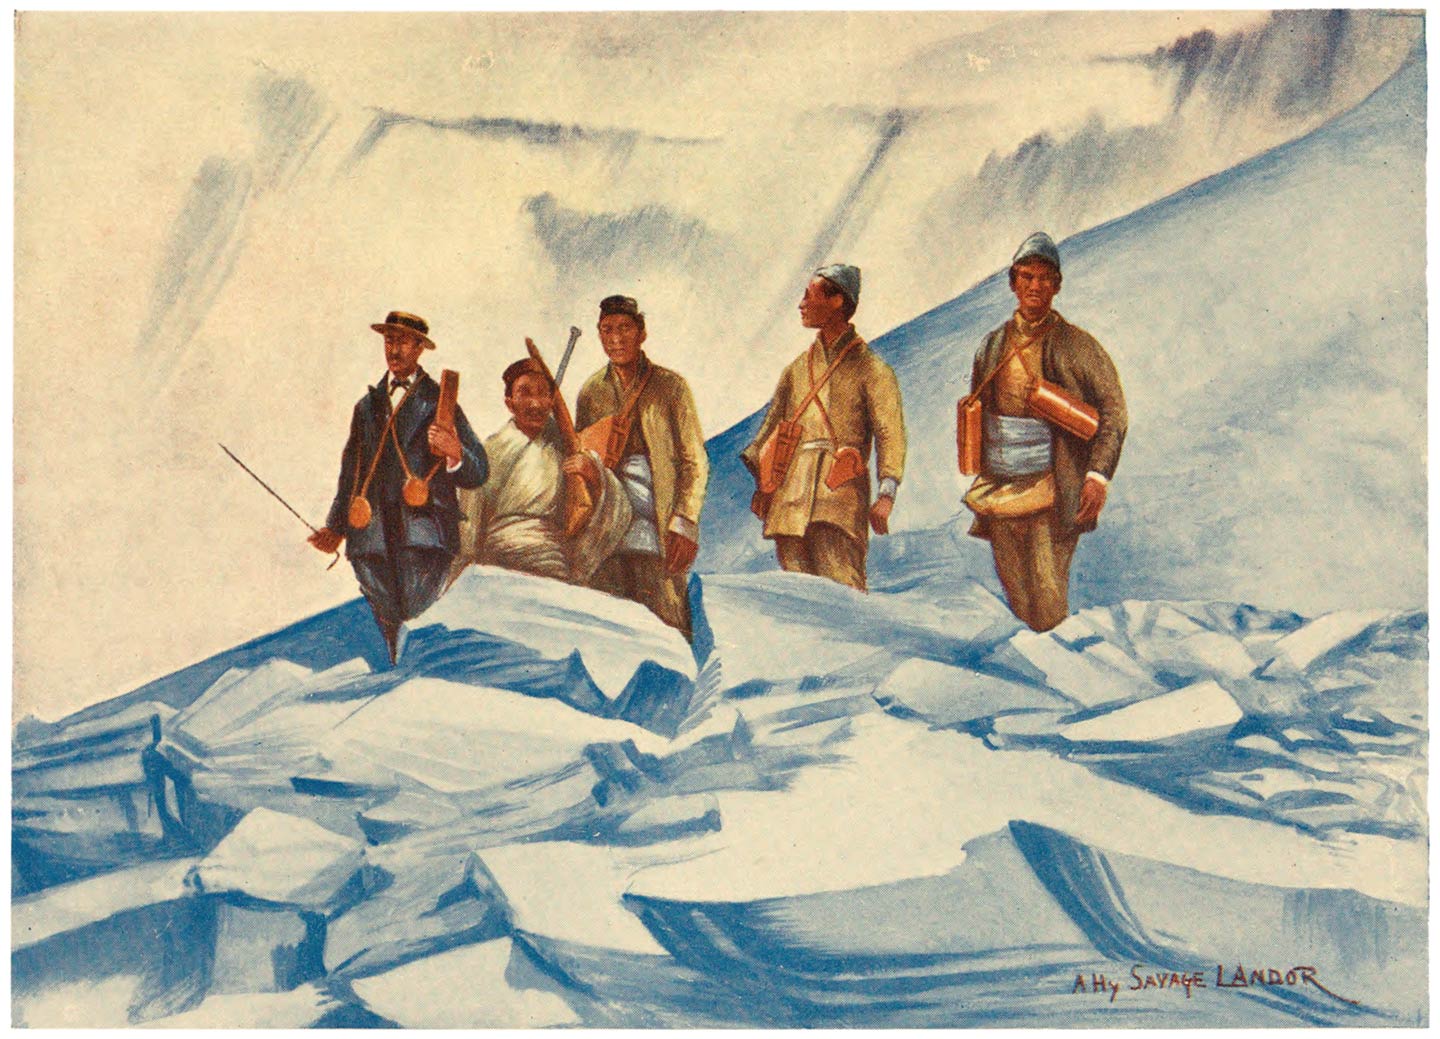 A. Henry Savage Landor and the Four Men who accompanied him on his Ascent to 23,490 feet above Sea-Level